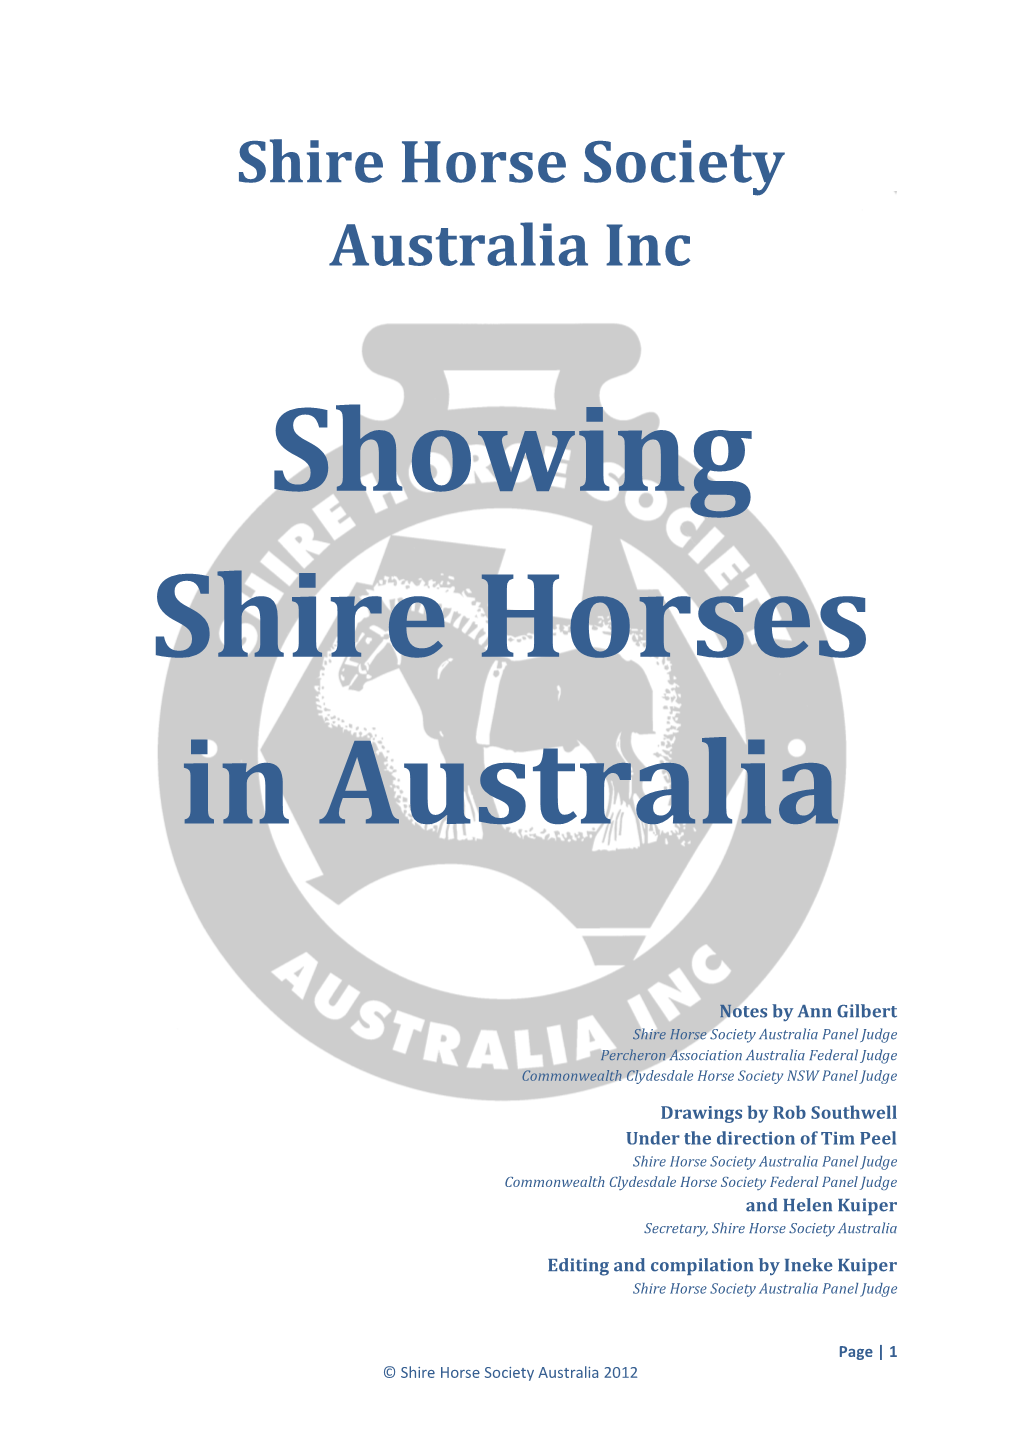 Showing Shire Horses in Australia